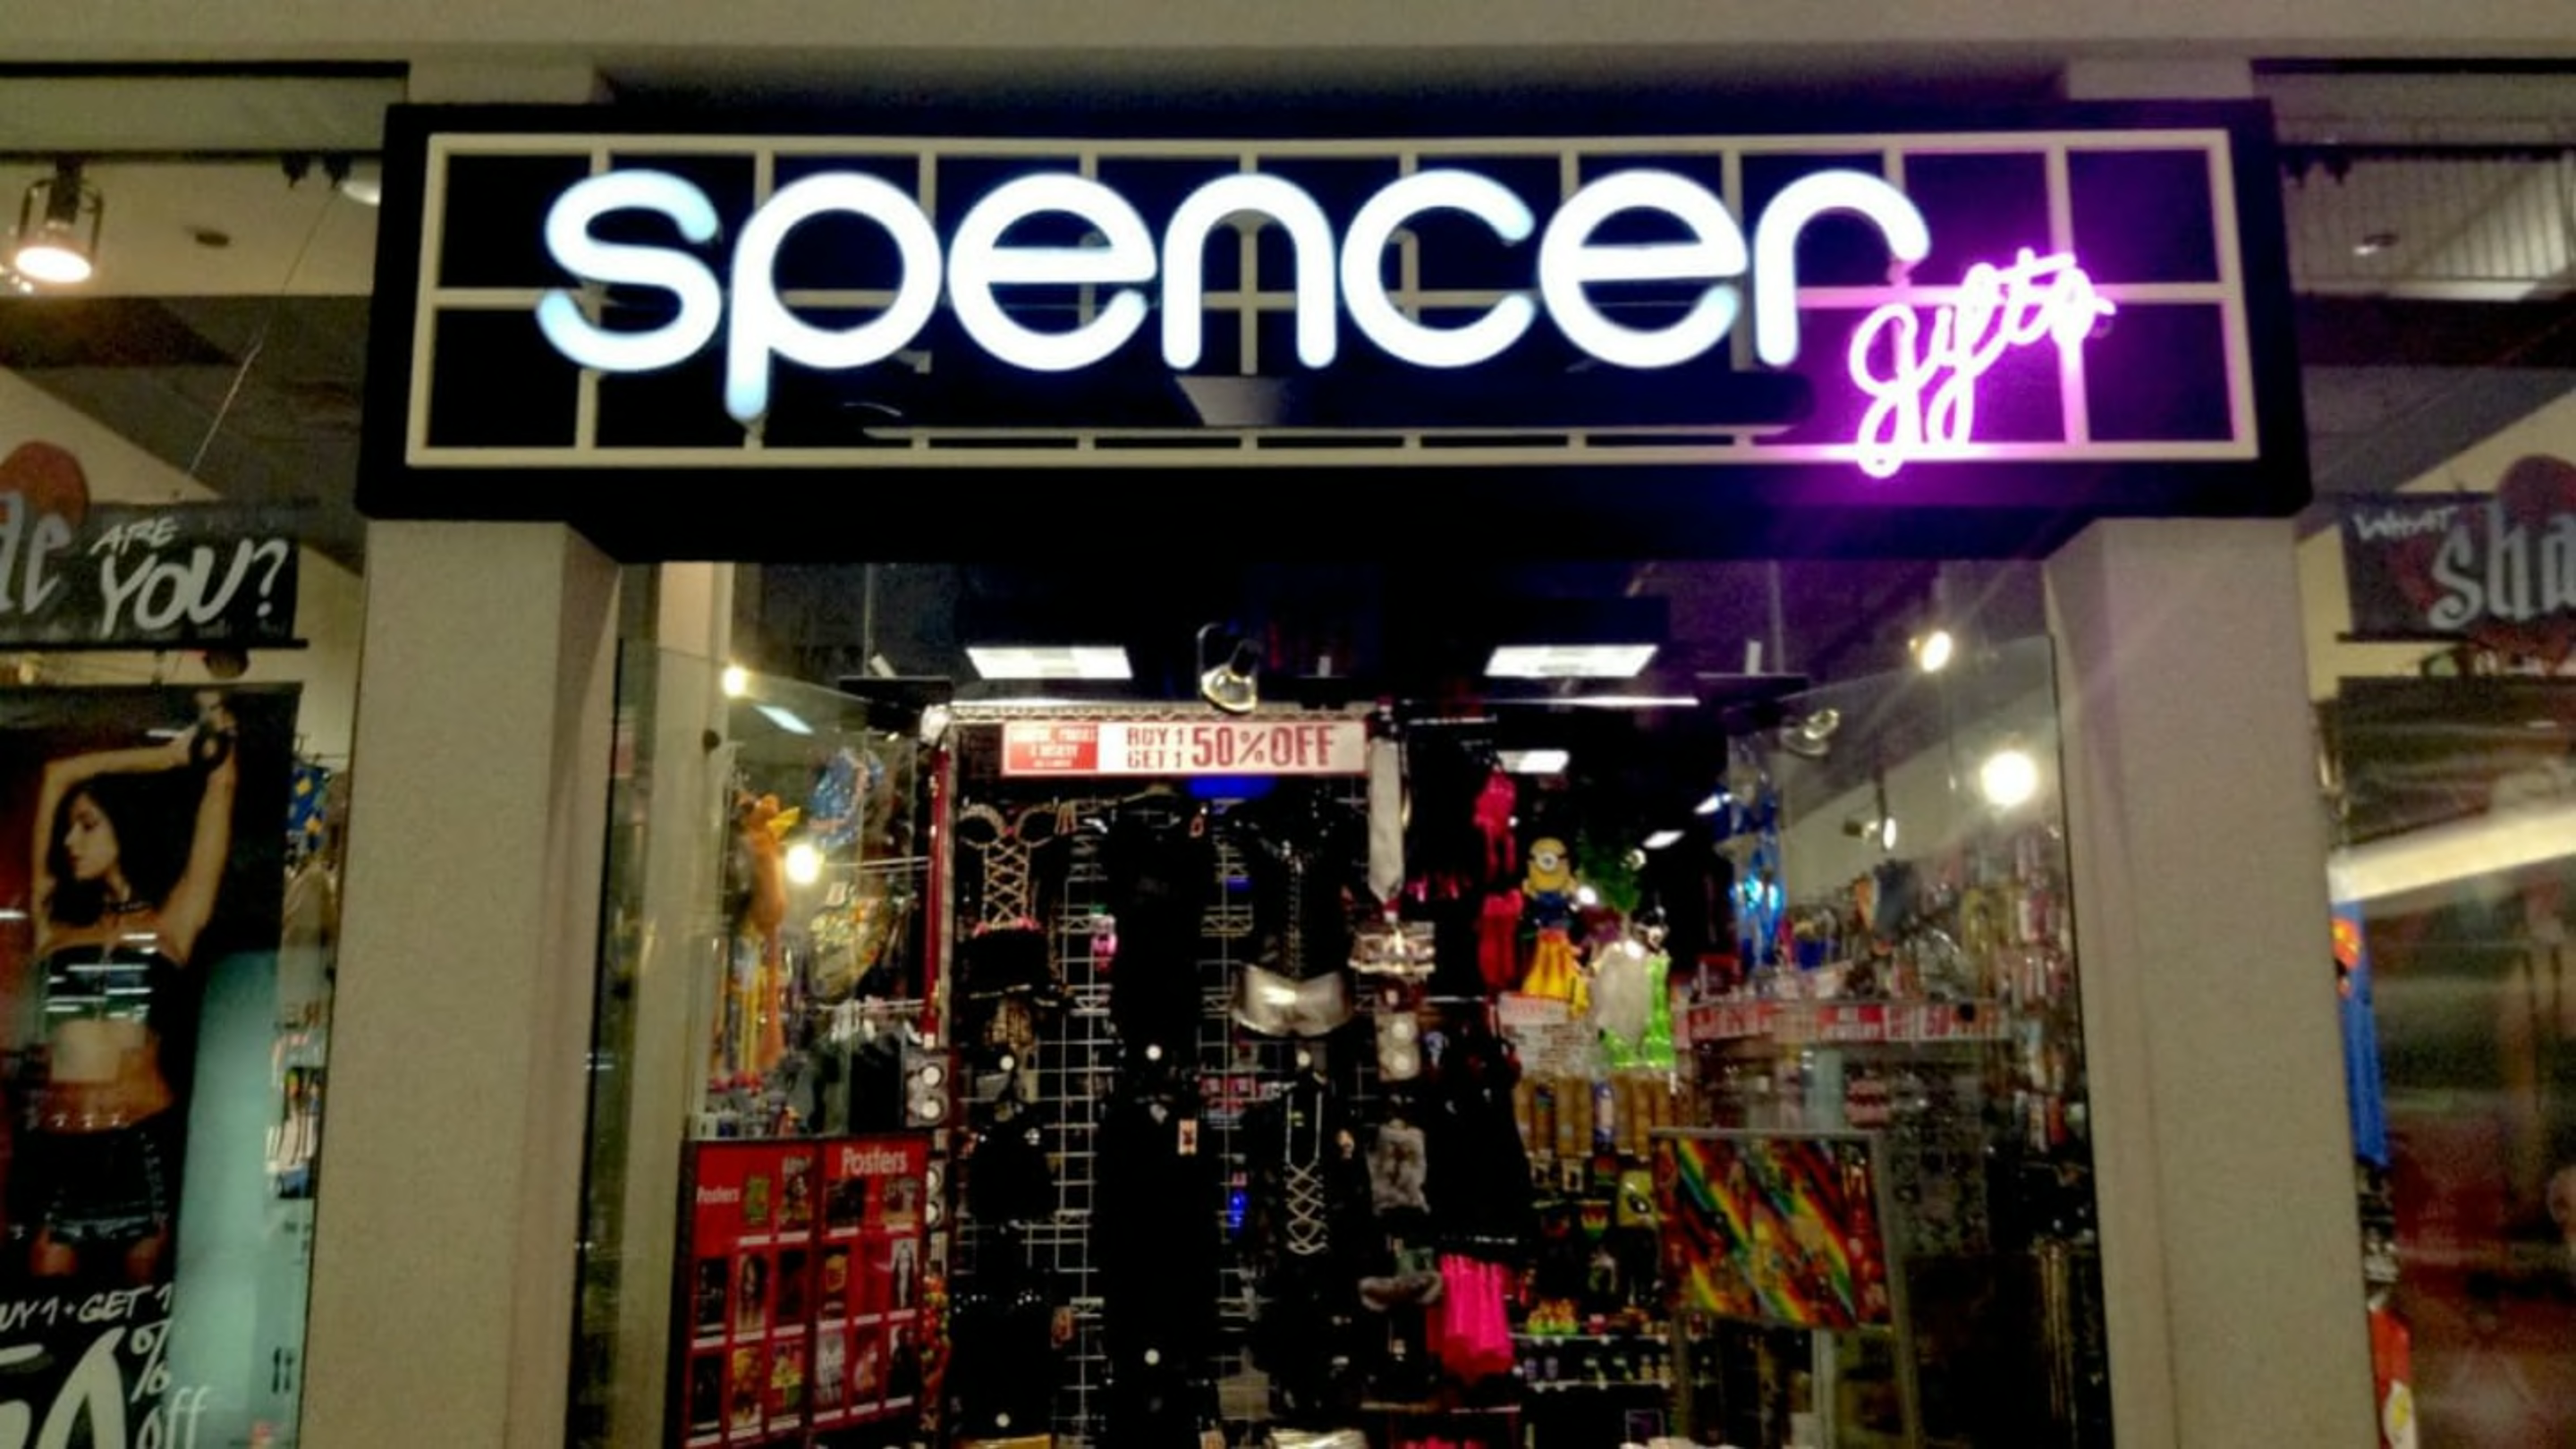 Fart Gallery: A Novel History of Spencer Gifts